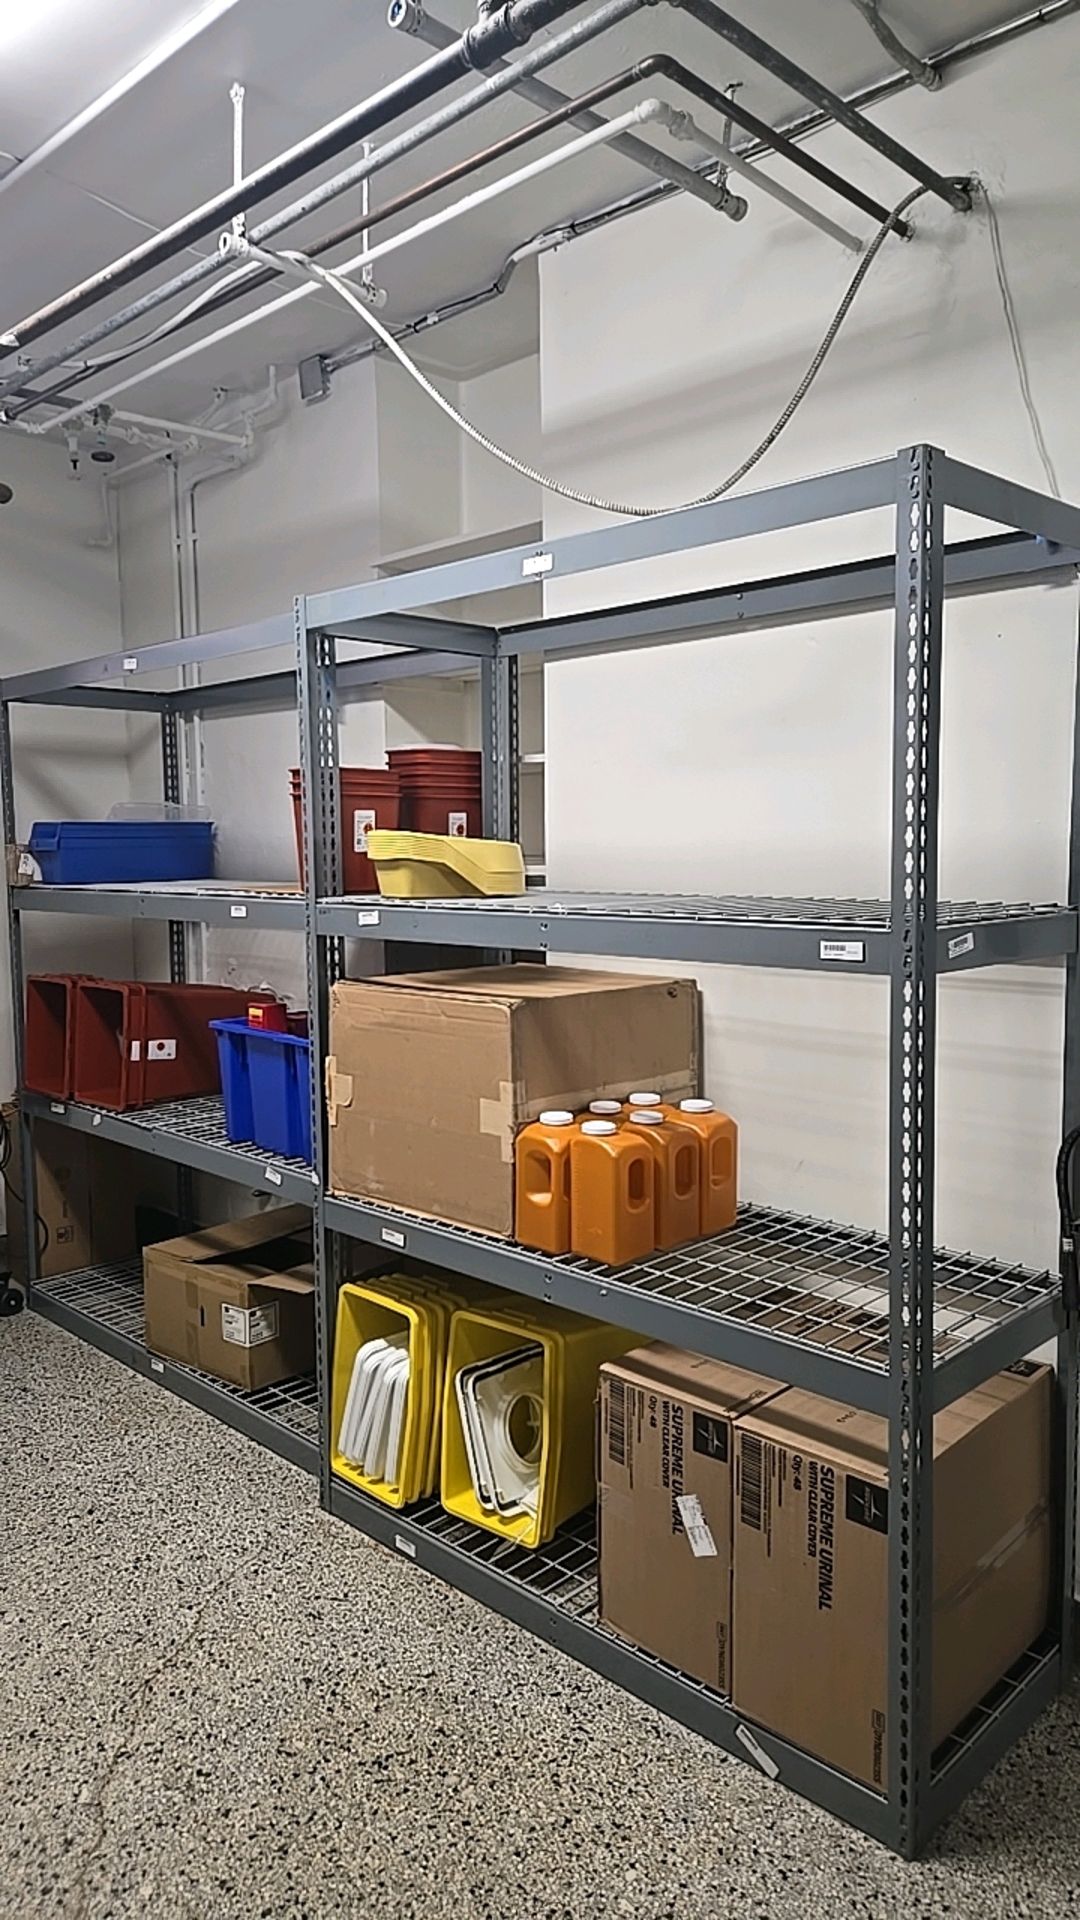 METAL FRAME WIRE SHELVING RACK SYSTEM, QTY. (5) CONTENT NOT INCLUDED) - Image 2 of 2